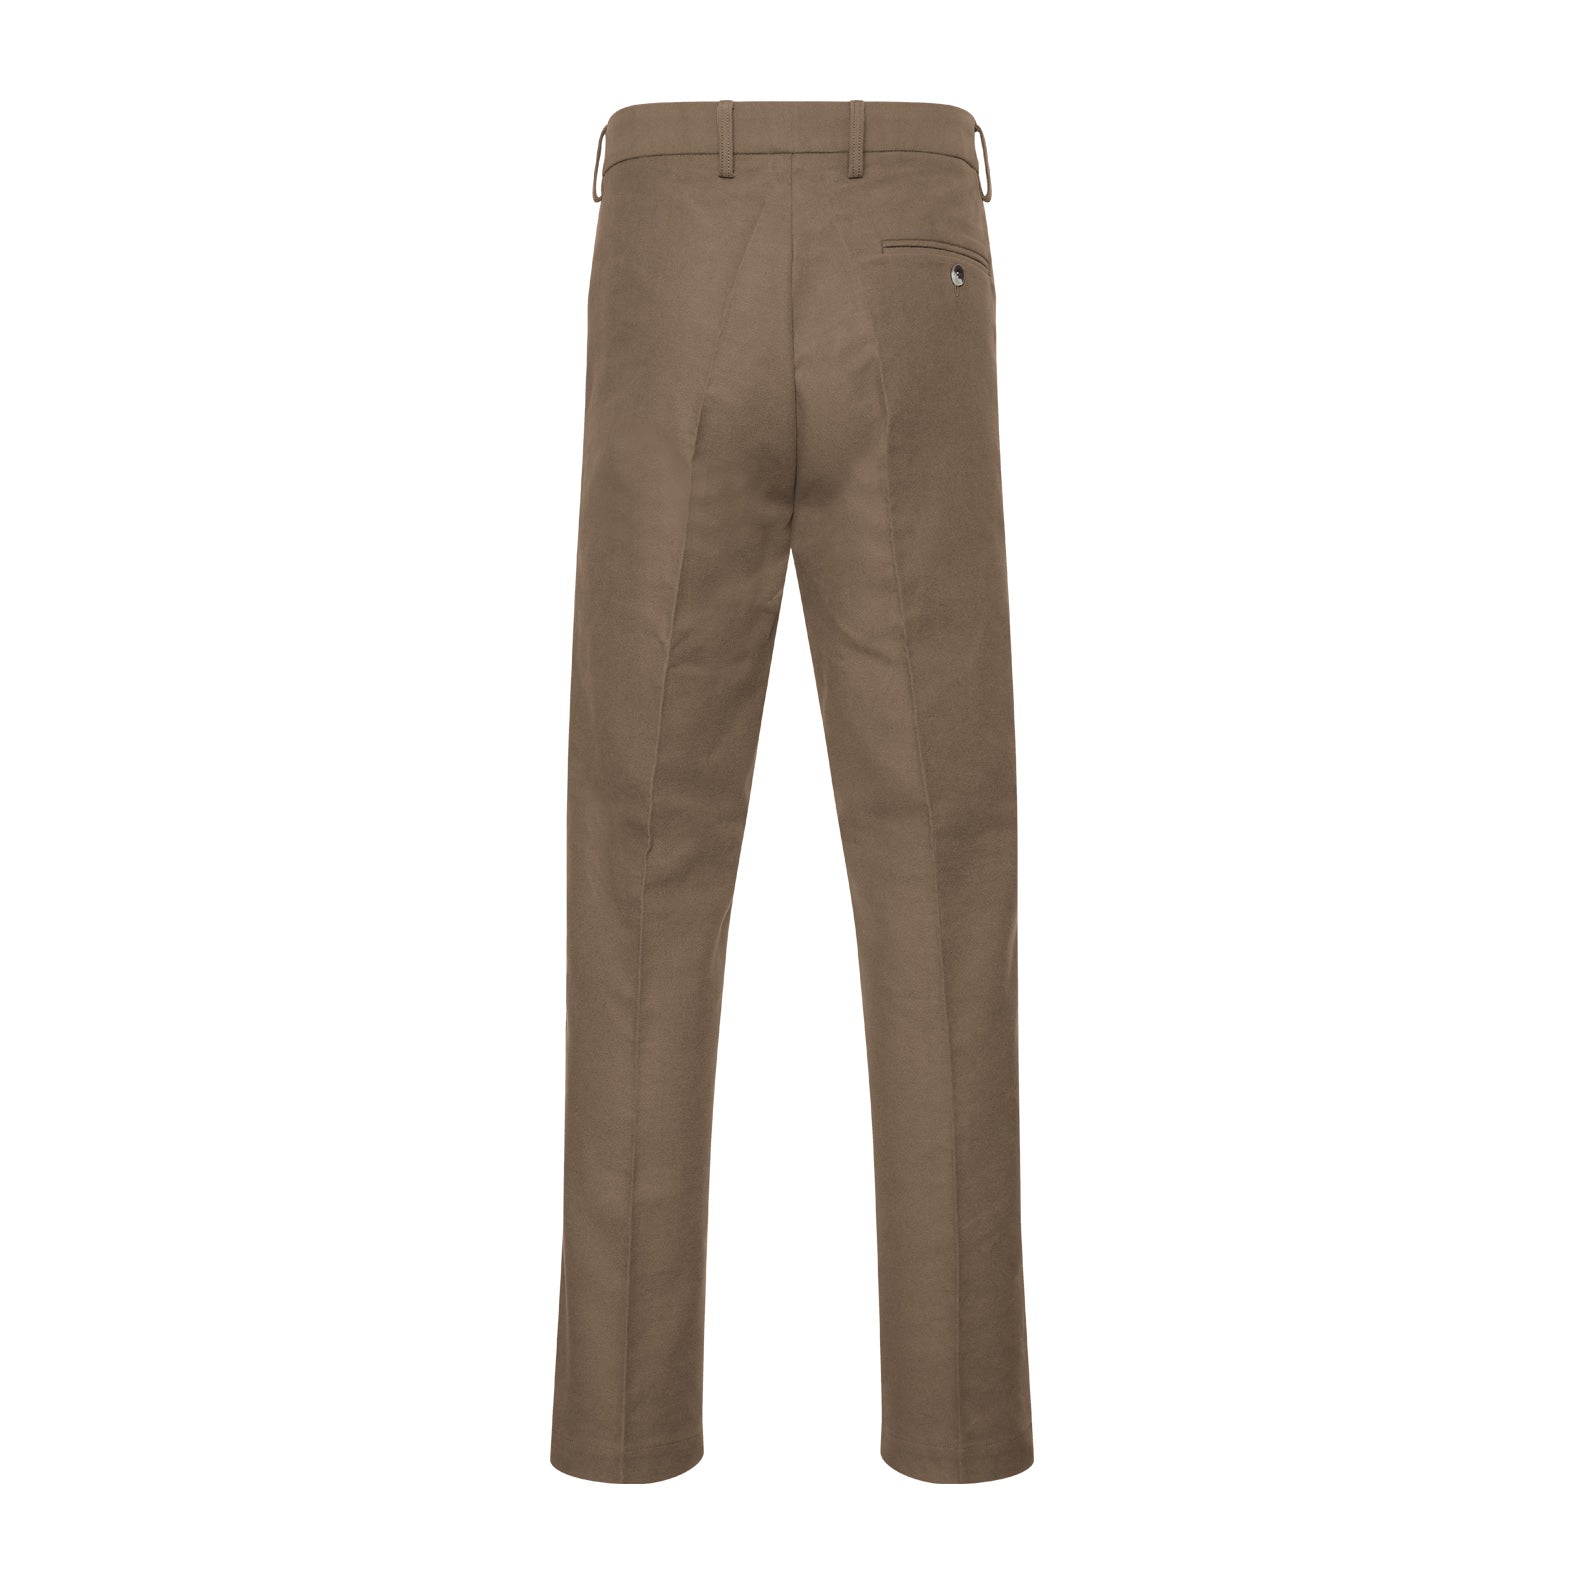 Mens Heavyweight 100% Cotton Moleskin Trousers Casual Country Clothing  30-50 | eBay